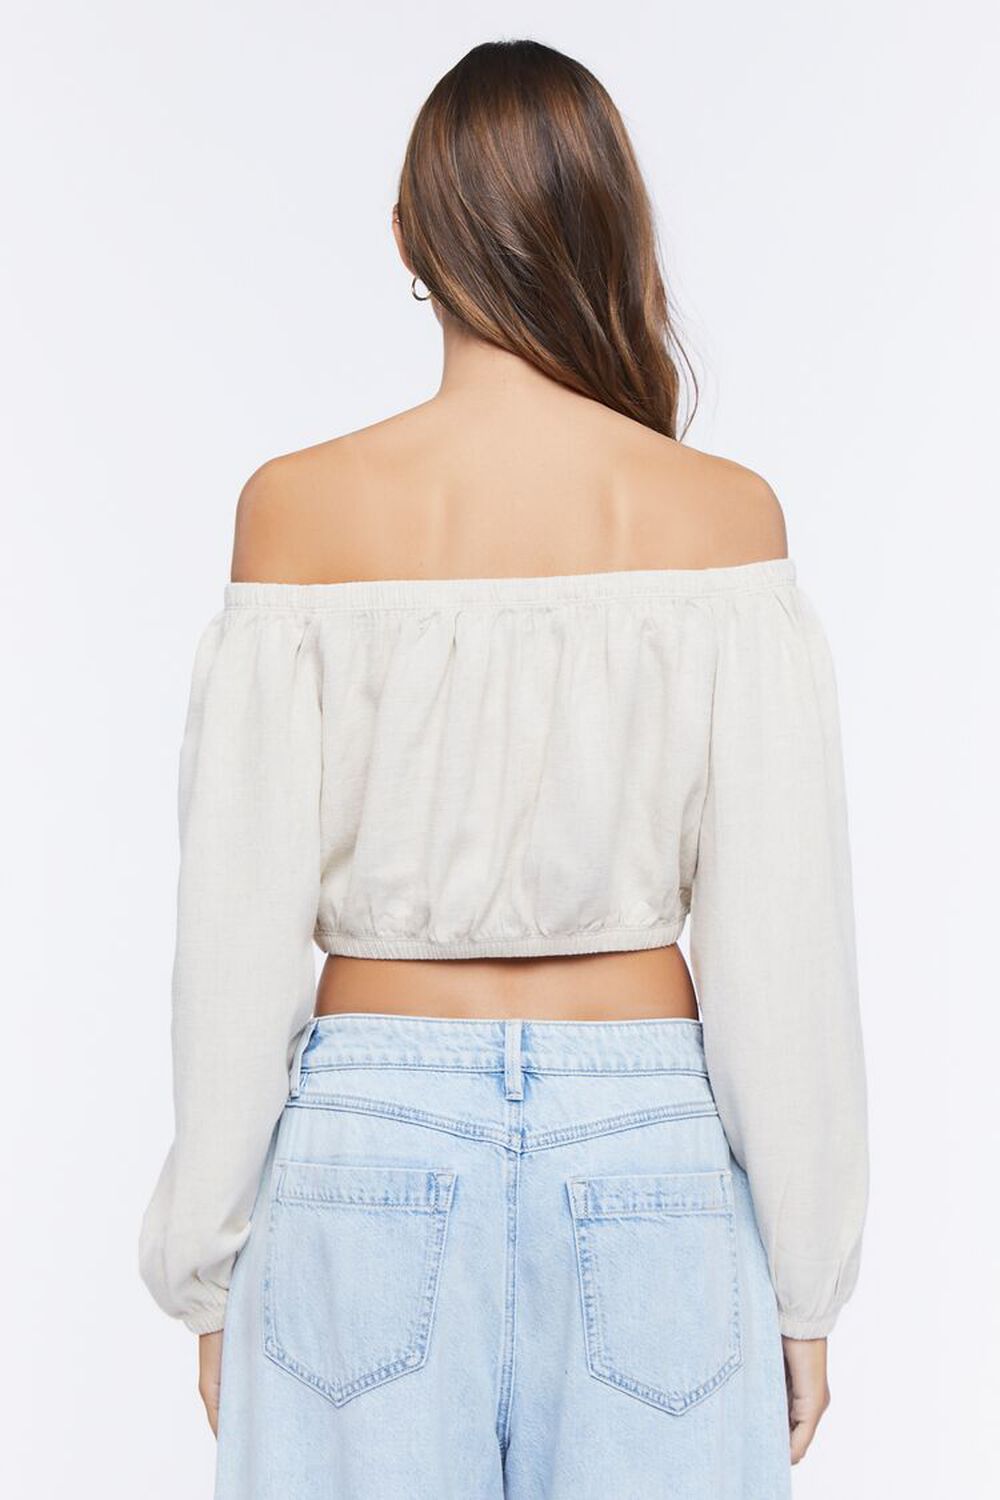 TAUPE Off-the-Shoulder Crop Top, image 3